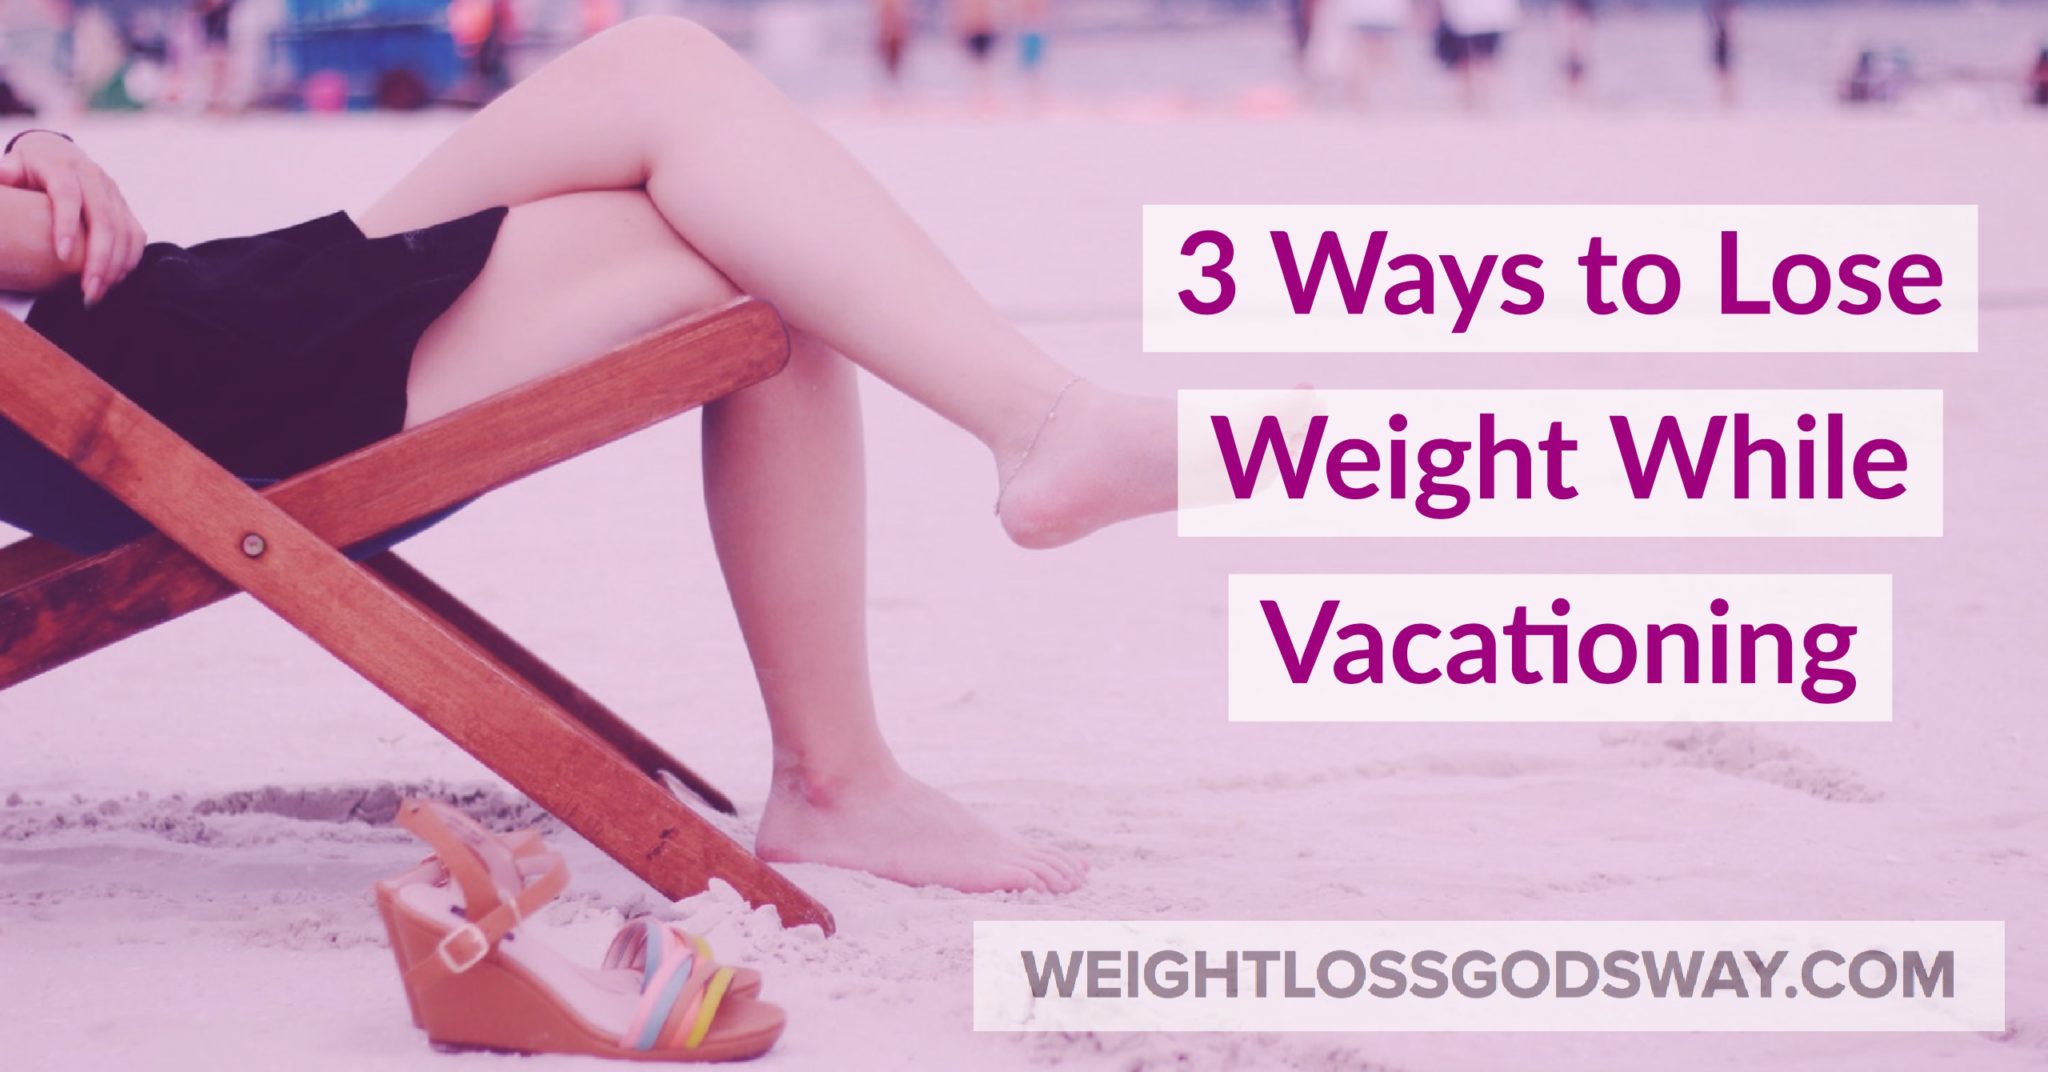 3 Ways to Lose Weight While Vacationing